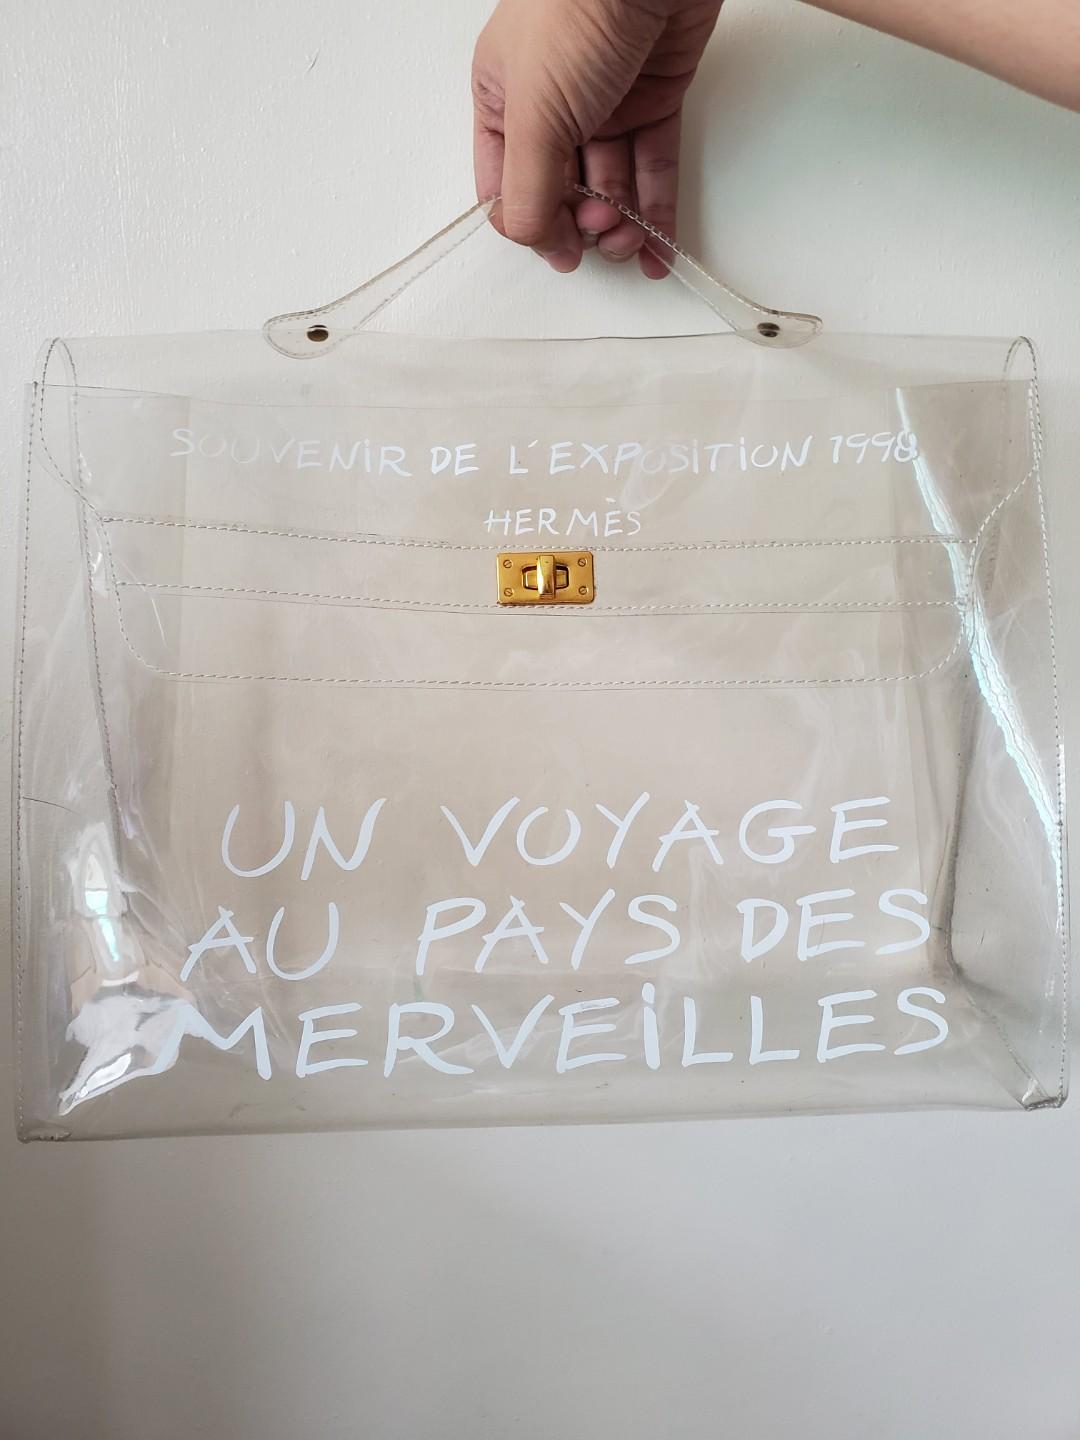 SALE!! Extremely Rare Hermes Voyage Kelly pvc Special tote from 13k photo view 5